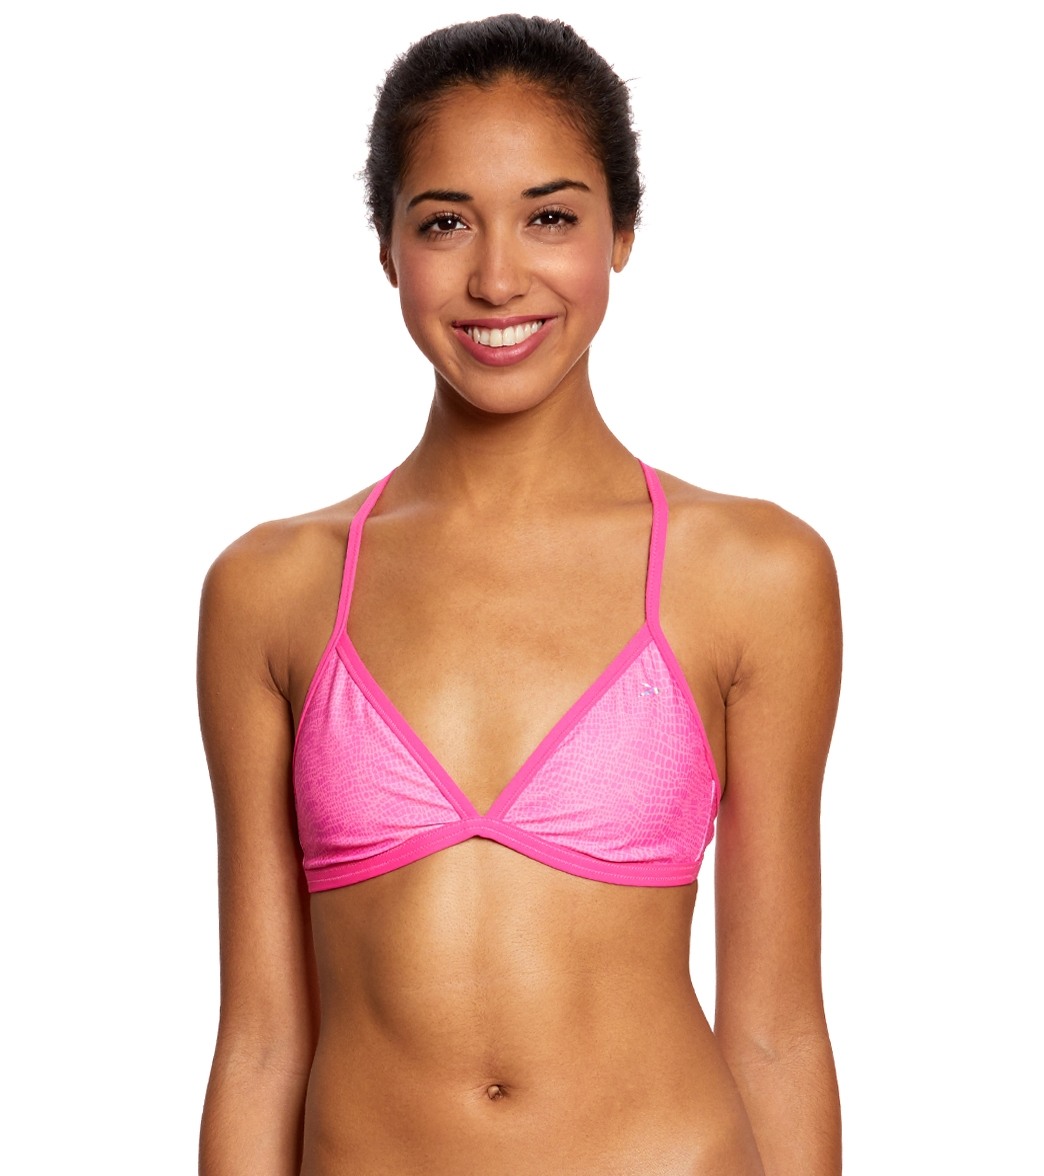 Speedo Missy Franklin Endurance Lite Reptile Style Triangle Swimsuit Top - Pink Large Polyester/Pbt - Swimoutlet.com